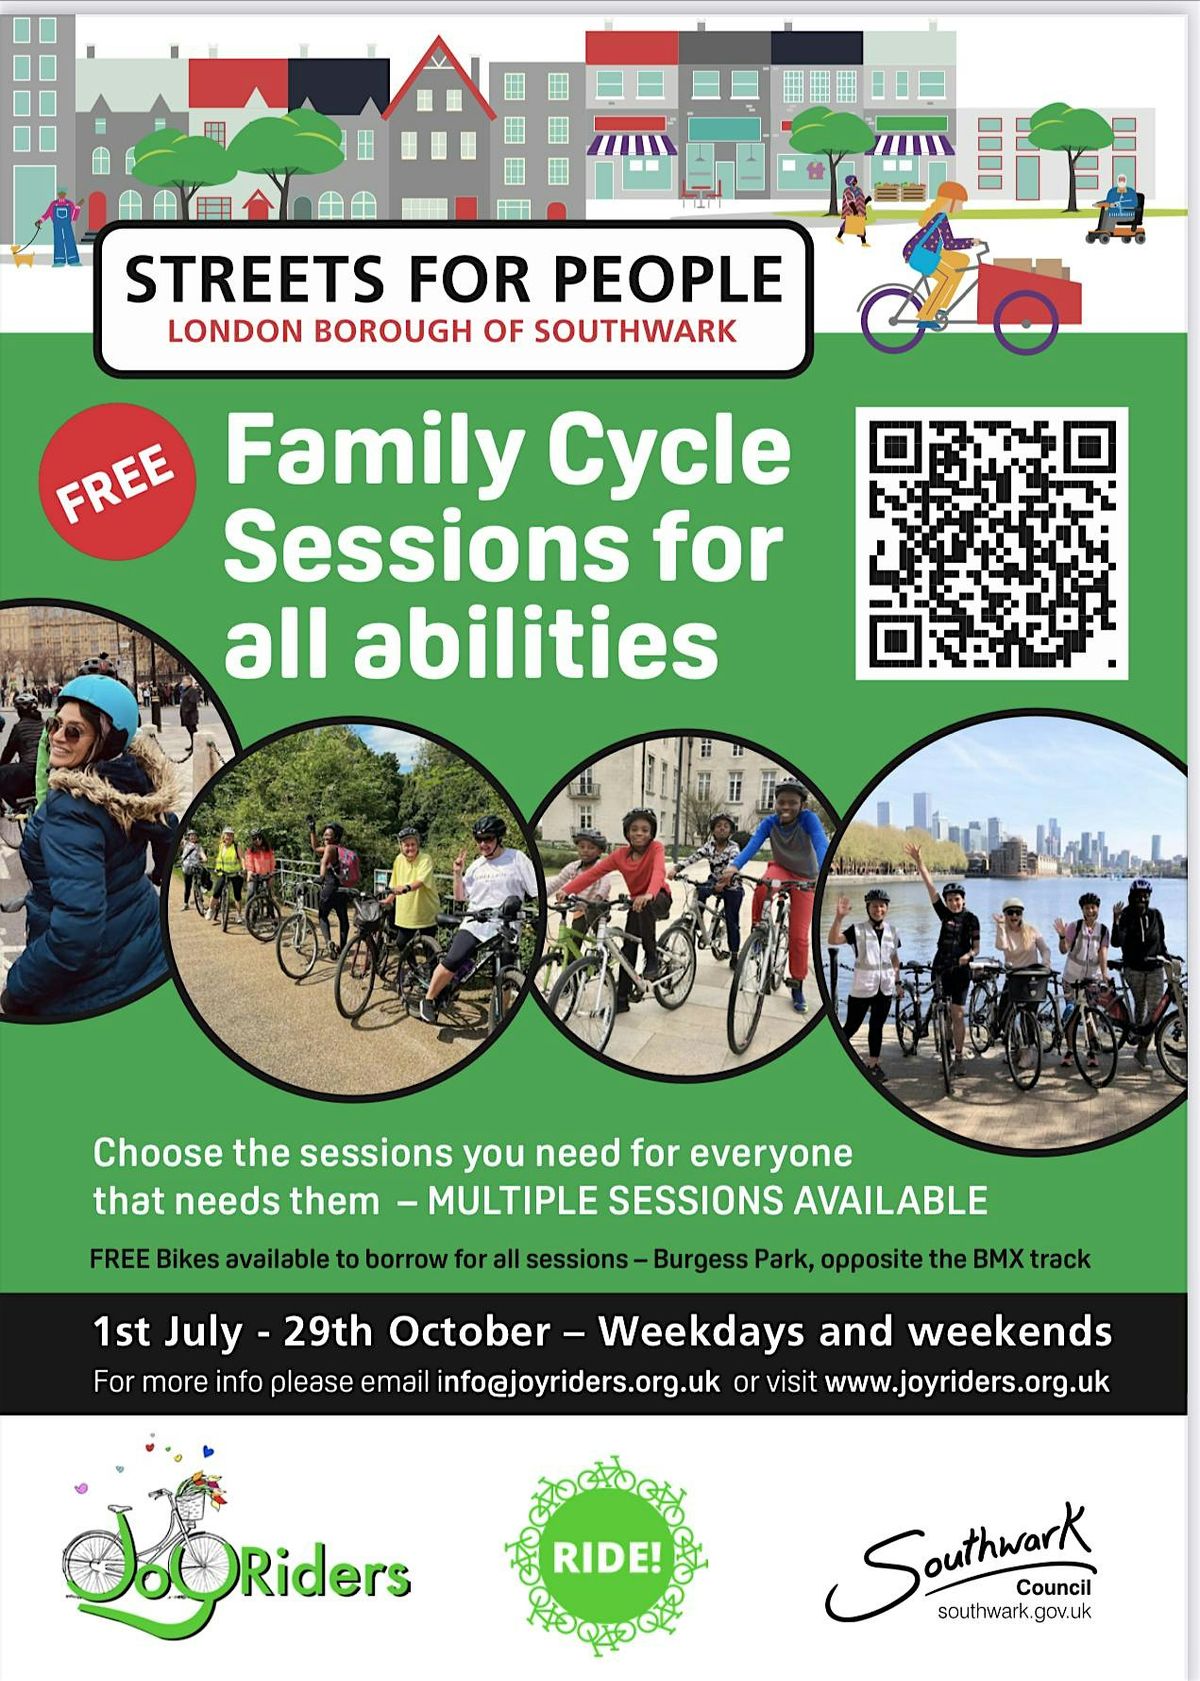 SOUTHWARK Family Cycle Sessions: Get confident on quiet roads!